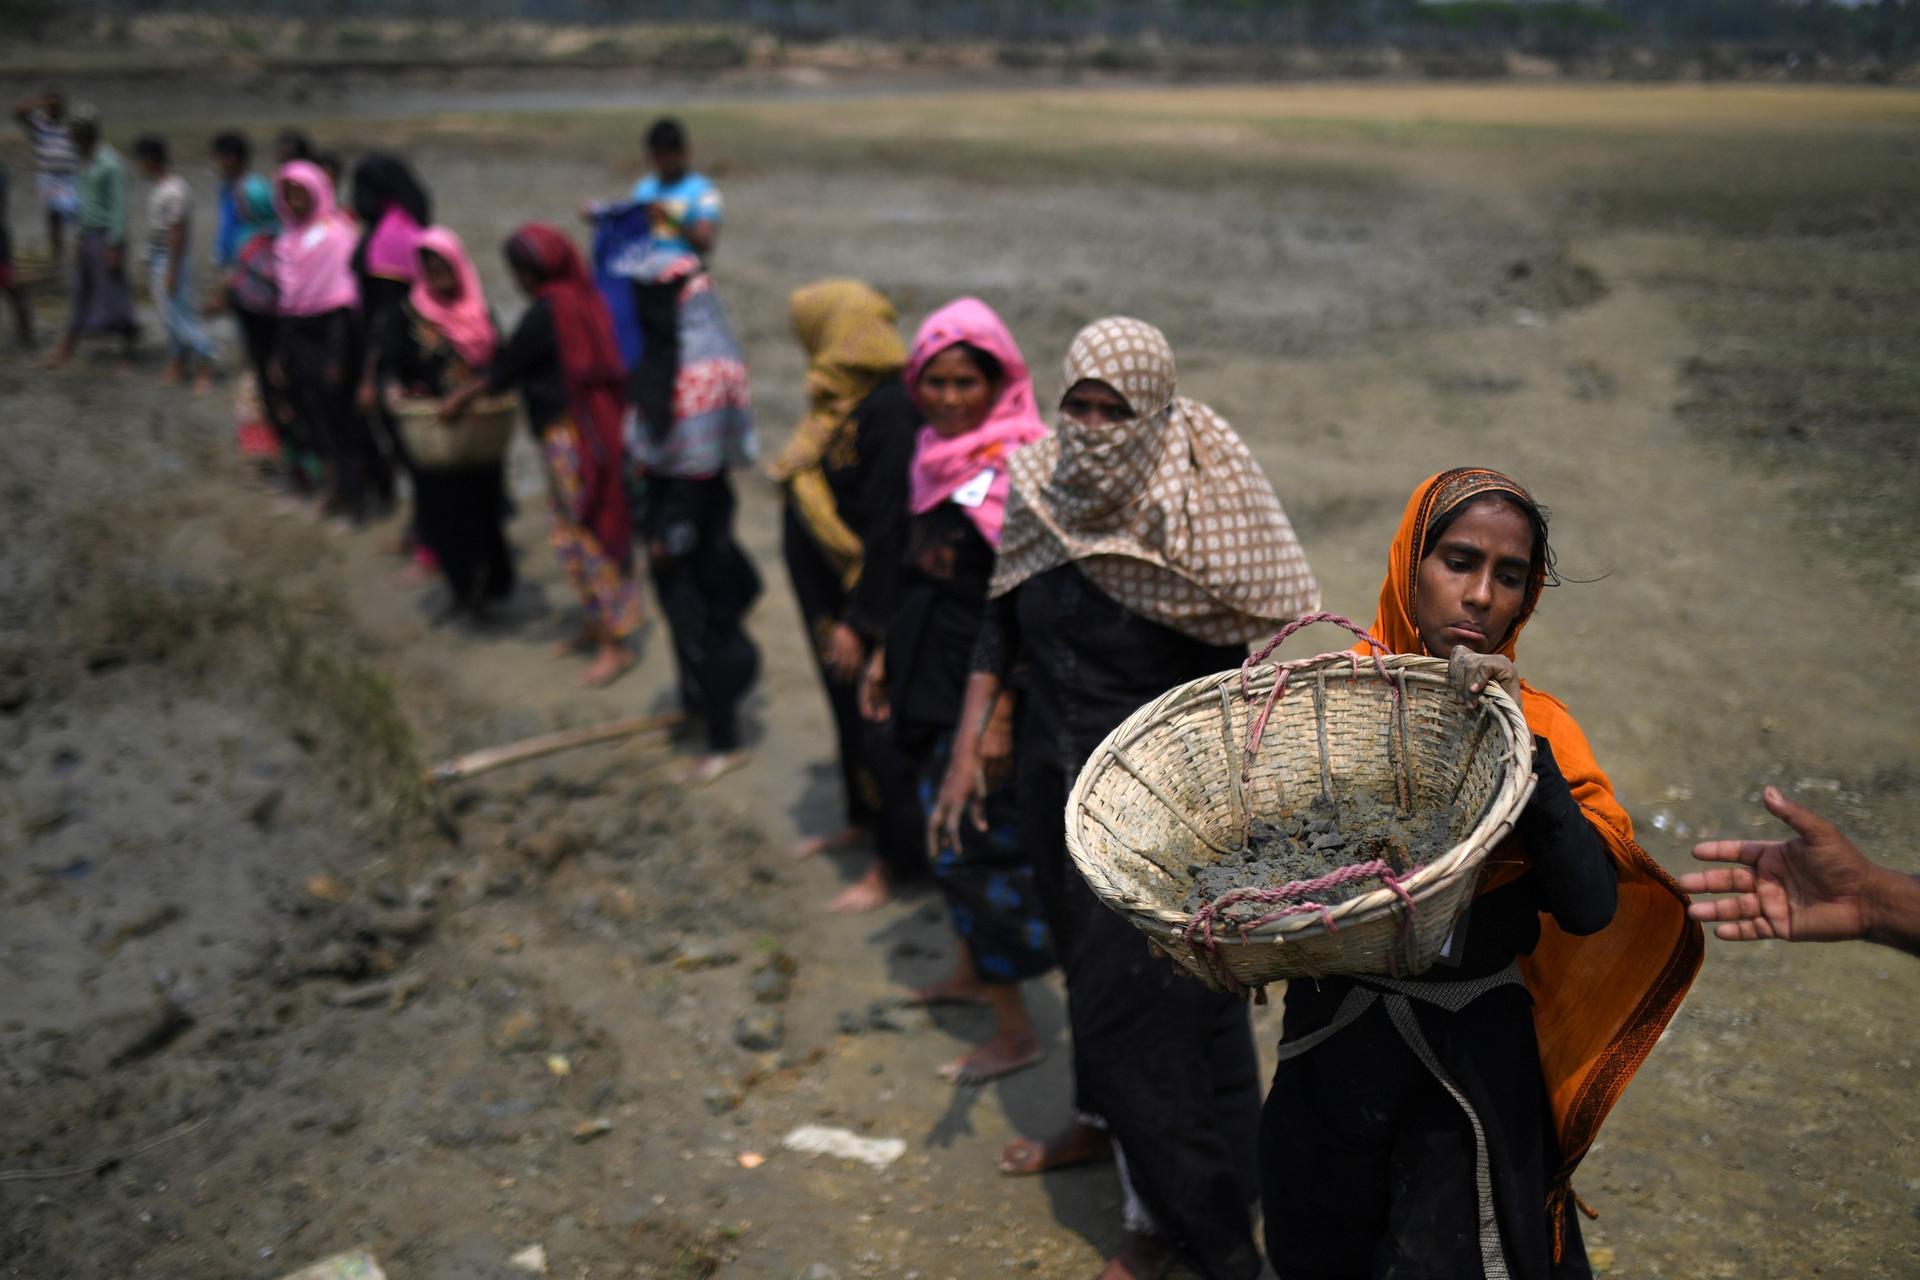 rohingya women lined up, carrying large baskets 